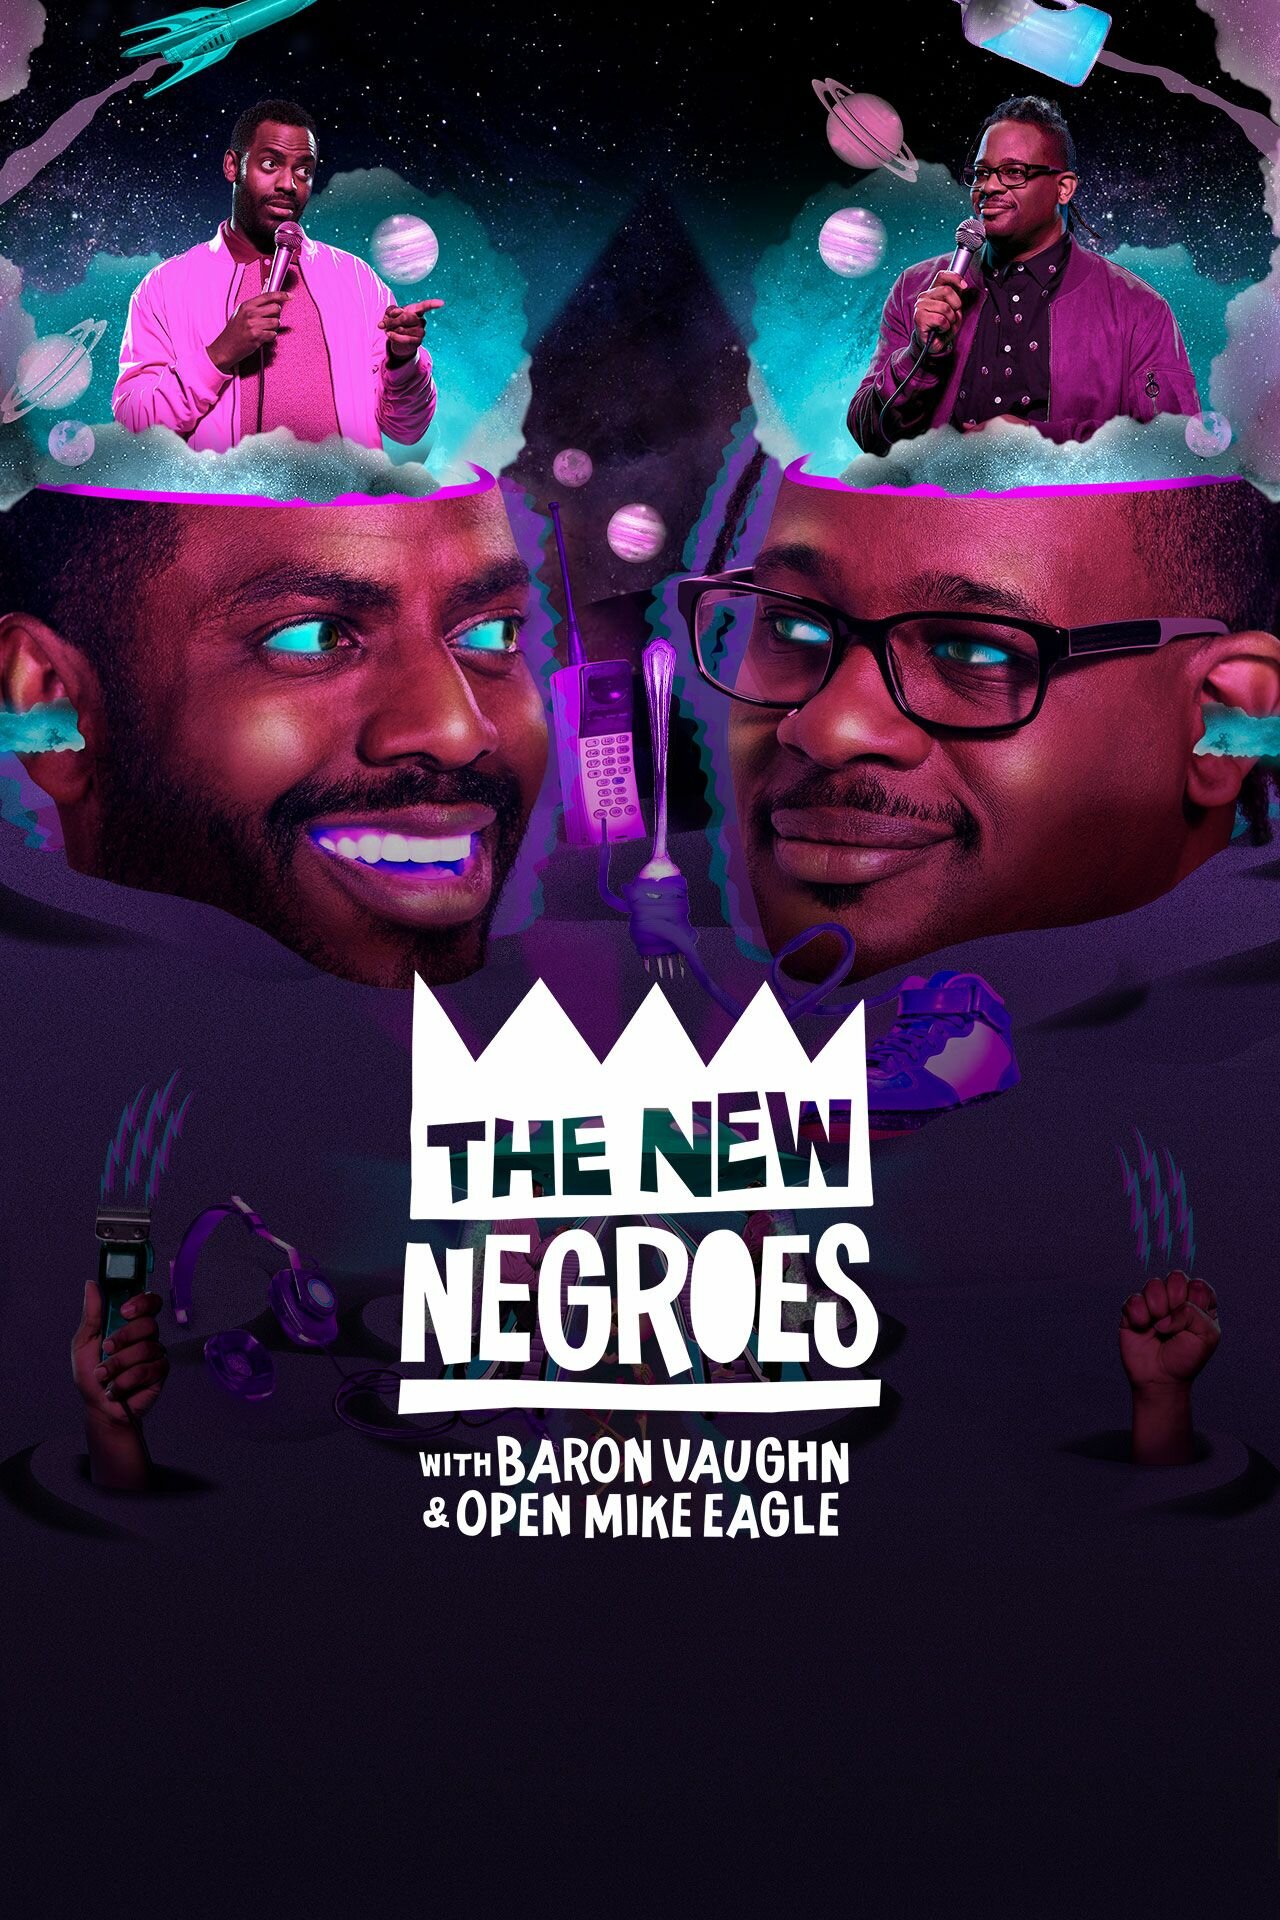 The New Negroes with Baron Vaughn & Open Mike Eagle ne zaman